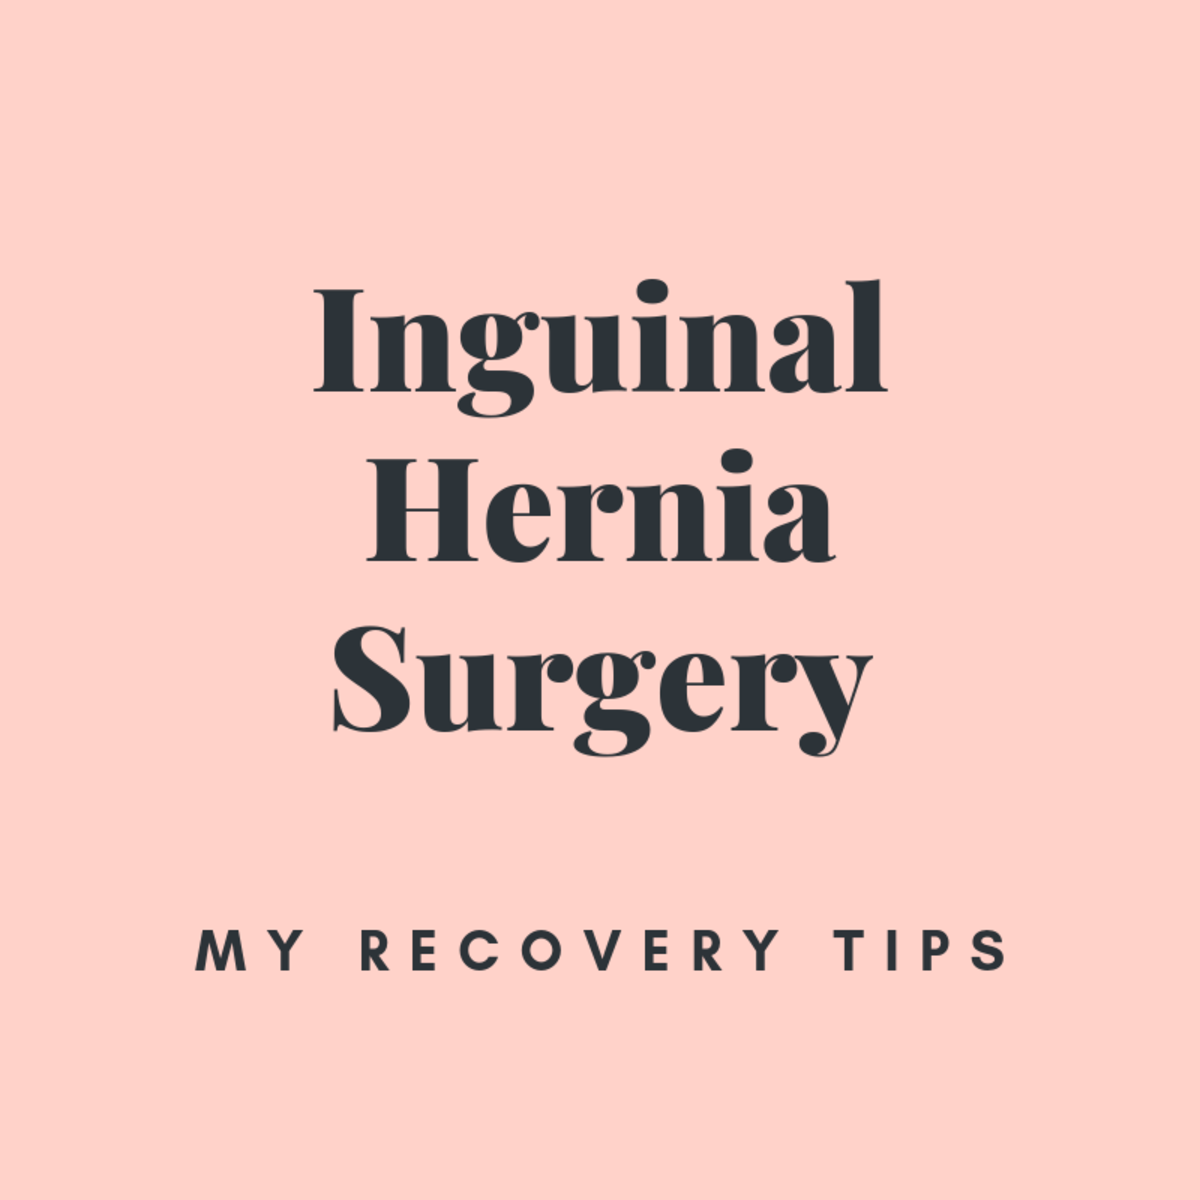 Inguinal hernias can easily be fixed with laparoscopic surgery. The hardest part is knowing how to recover properly.